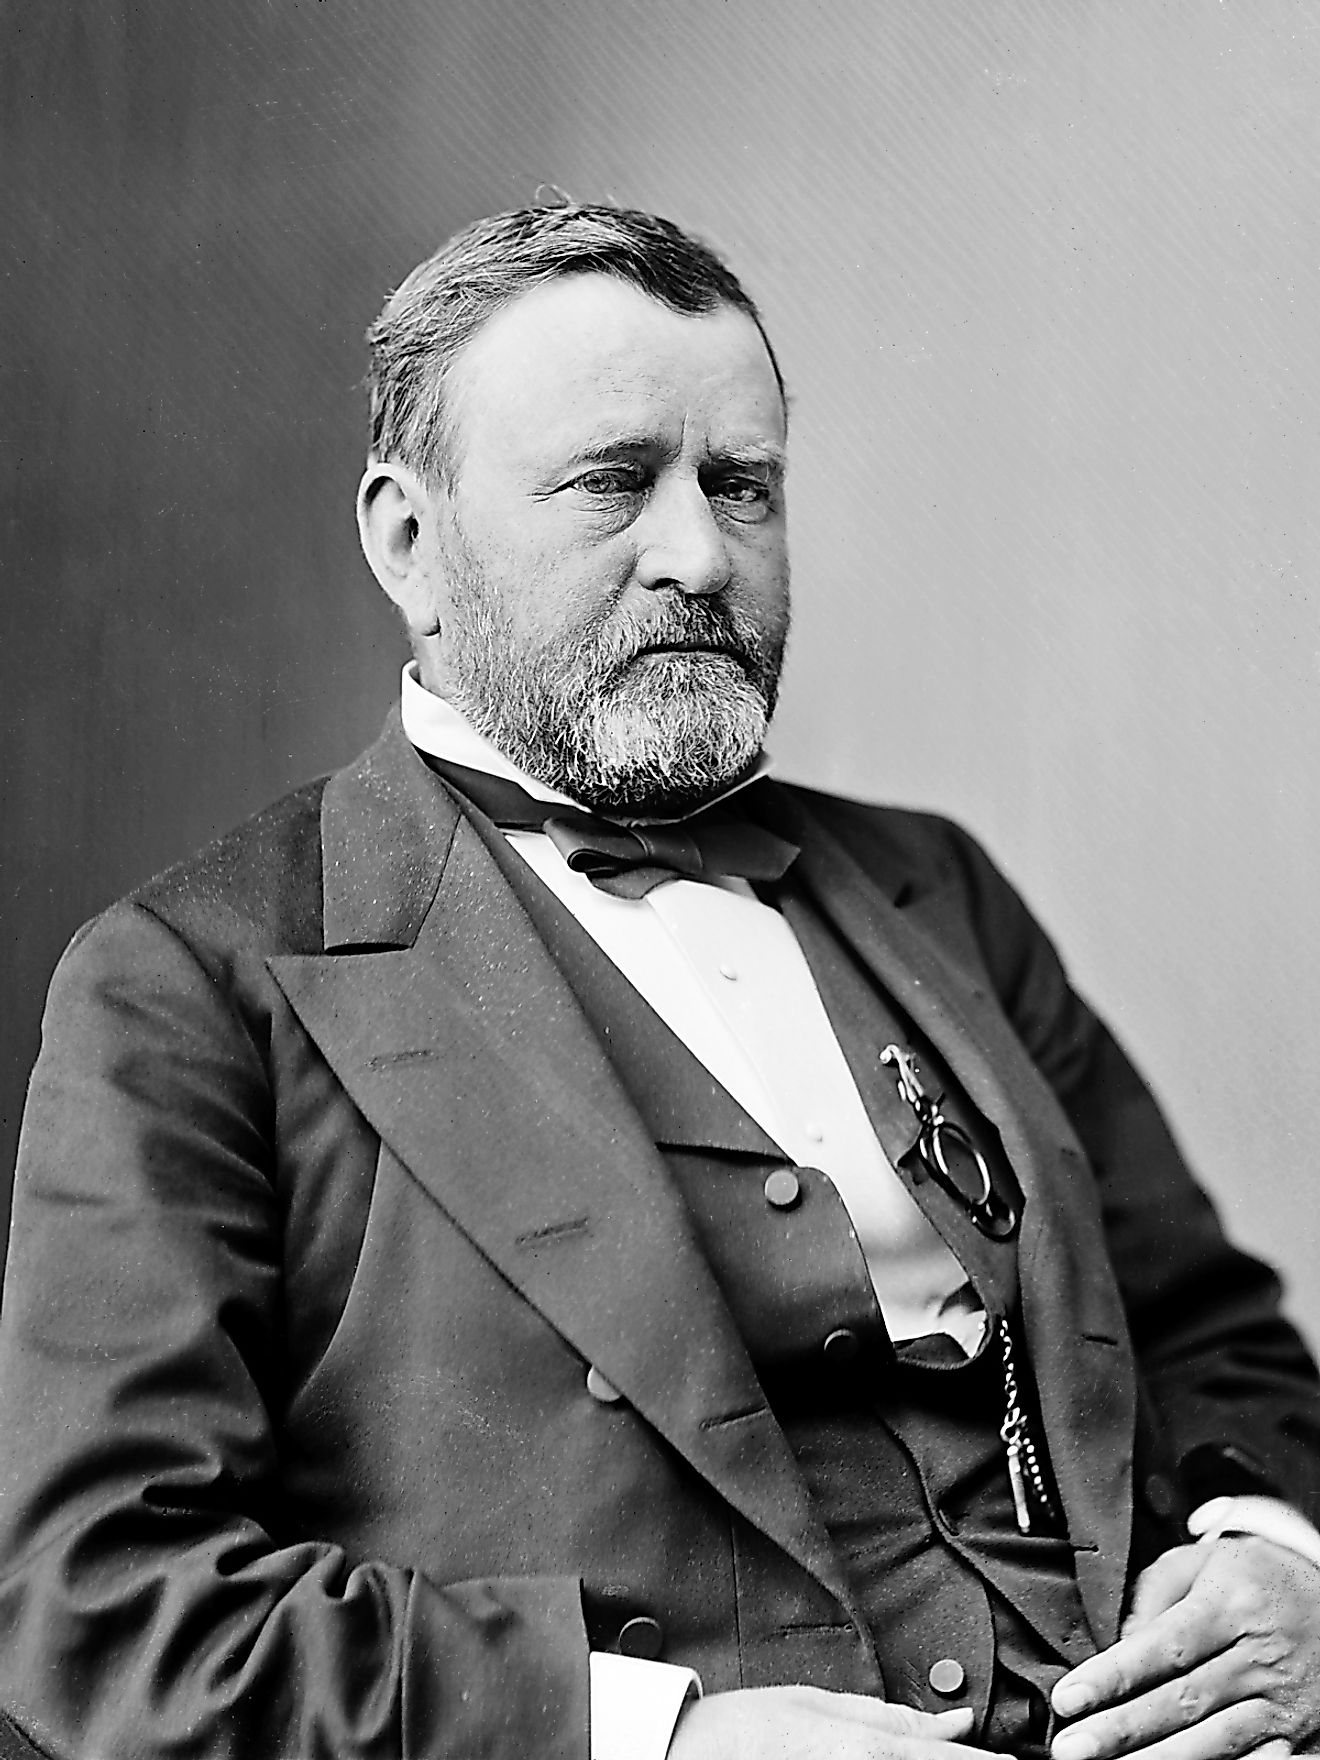 The 18th President of the United States Ulysses S. Grant. Image credit: Brady-Handy Photograph Collection, Library of Congress / Public domain